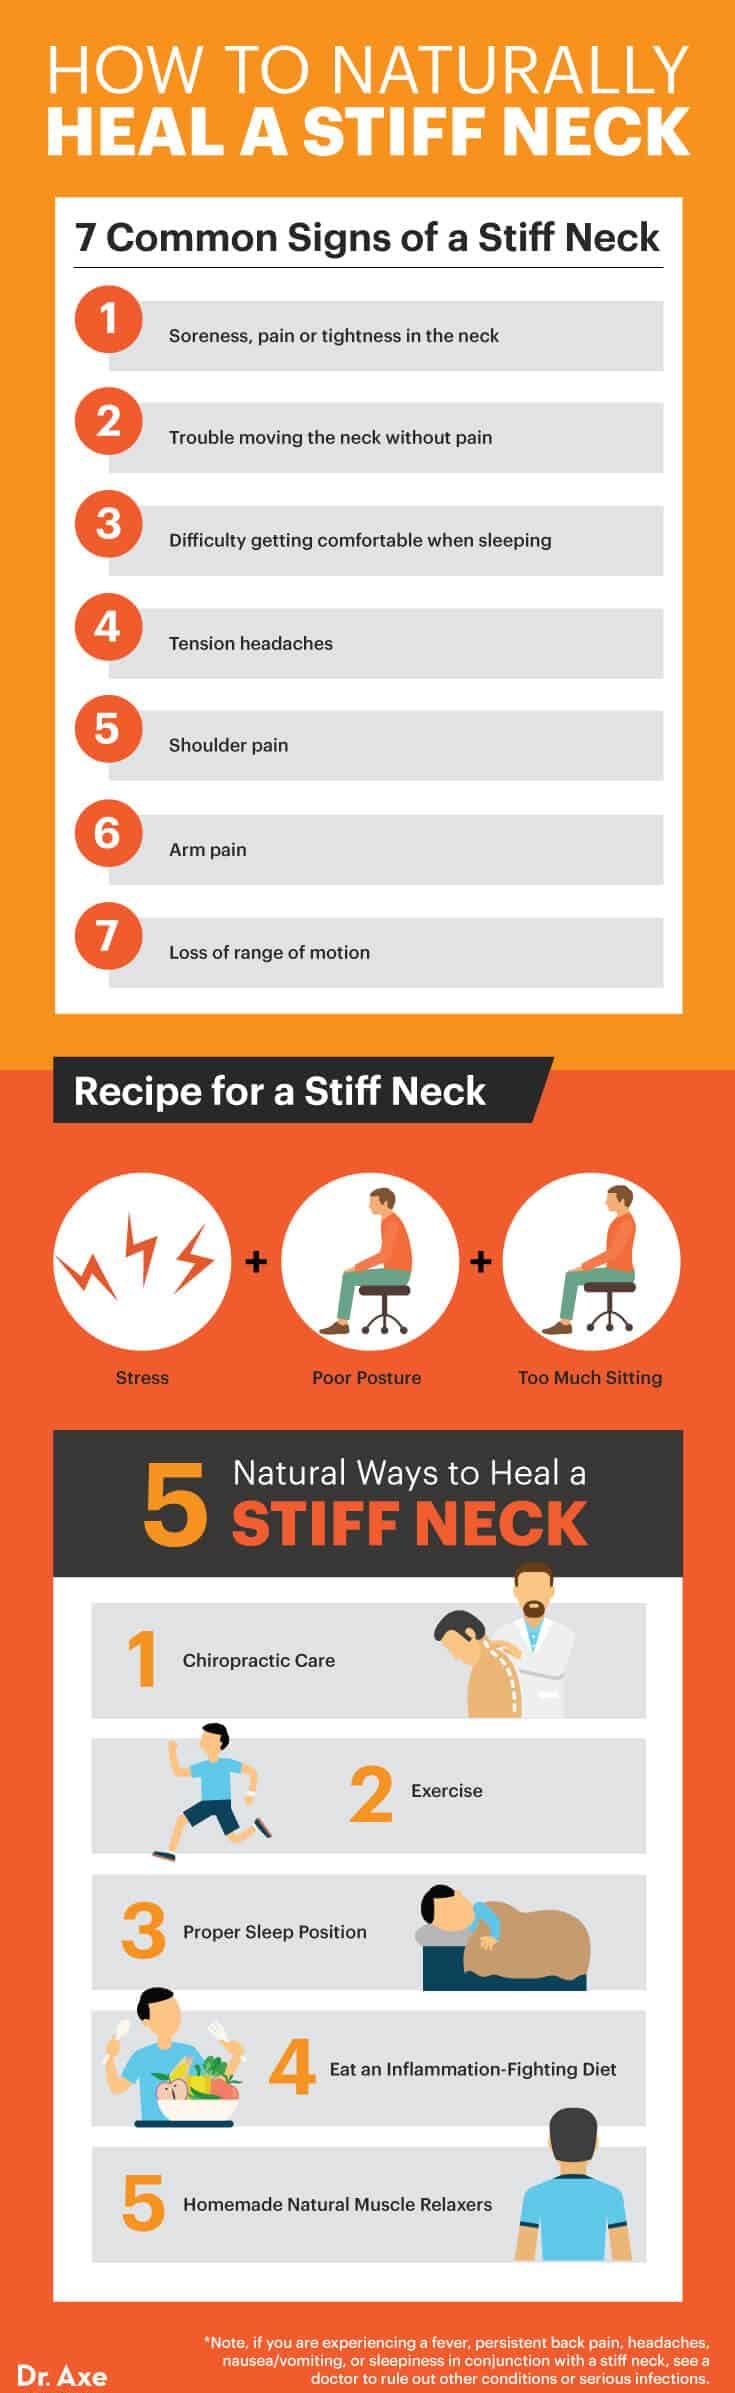 Stiff neck symptoms and remedies - Dr. Axe